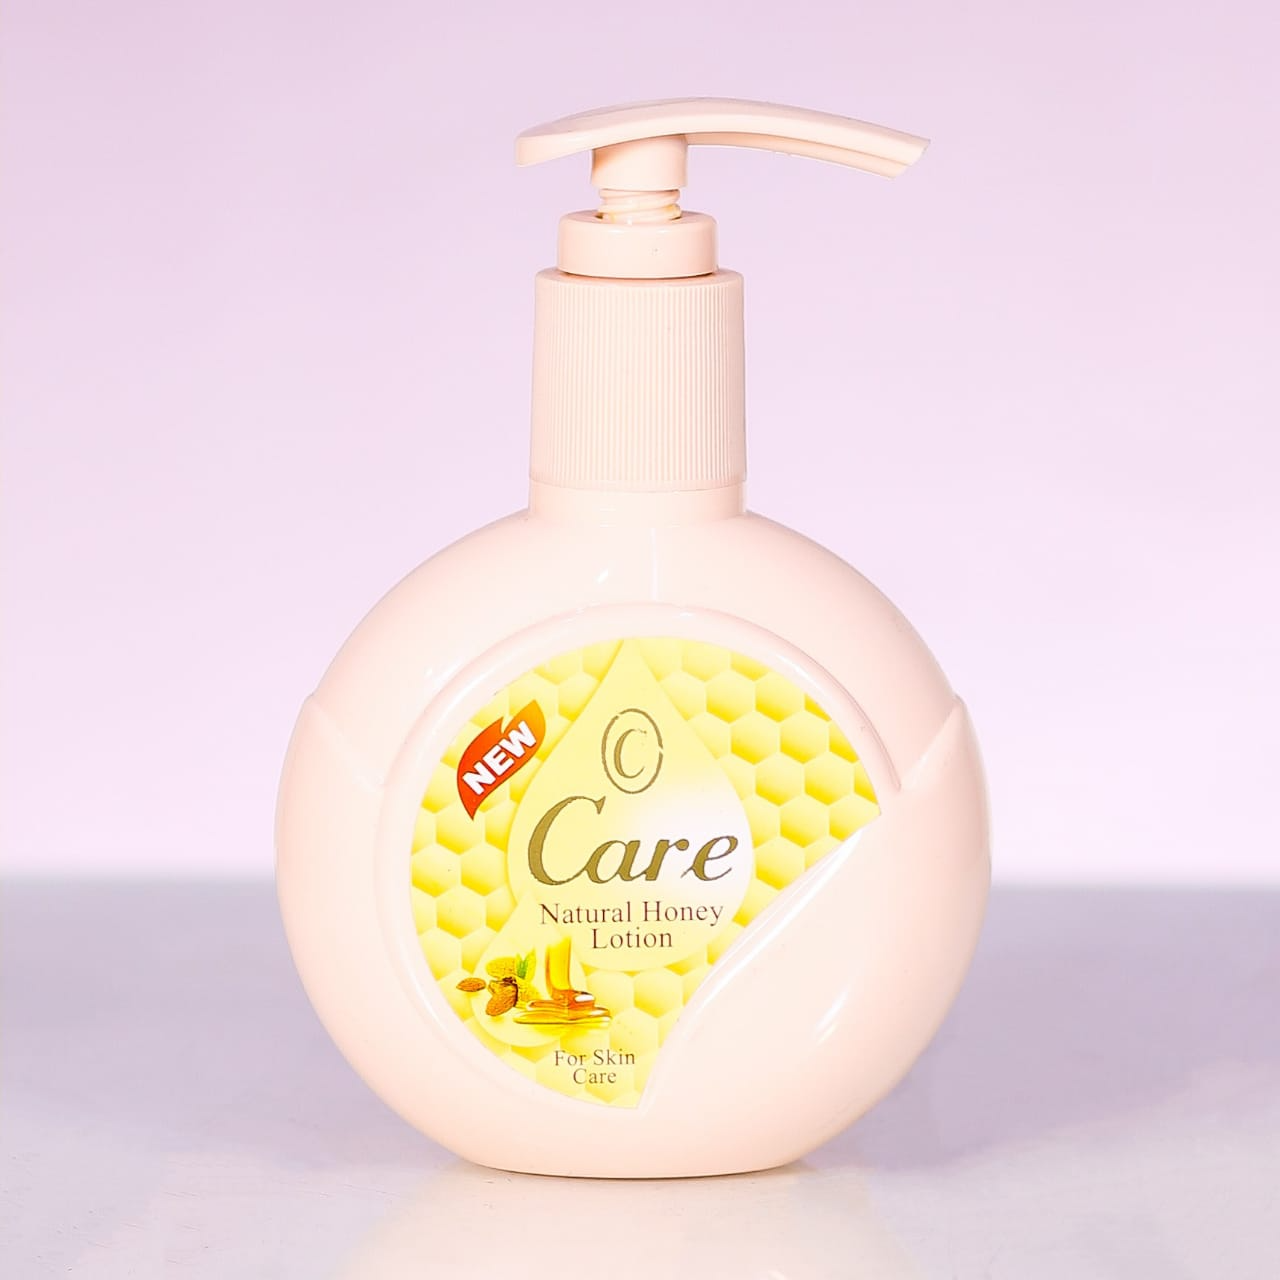 CARE NATURAL HONEY LOTION SKIN CARE 210 ML